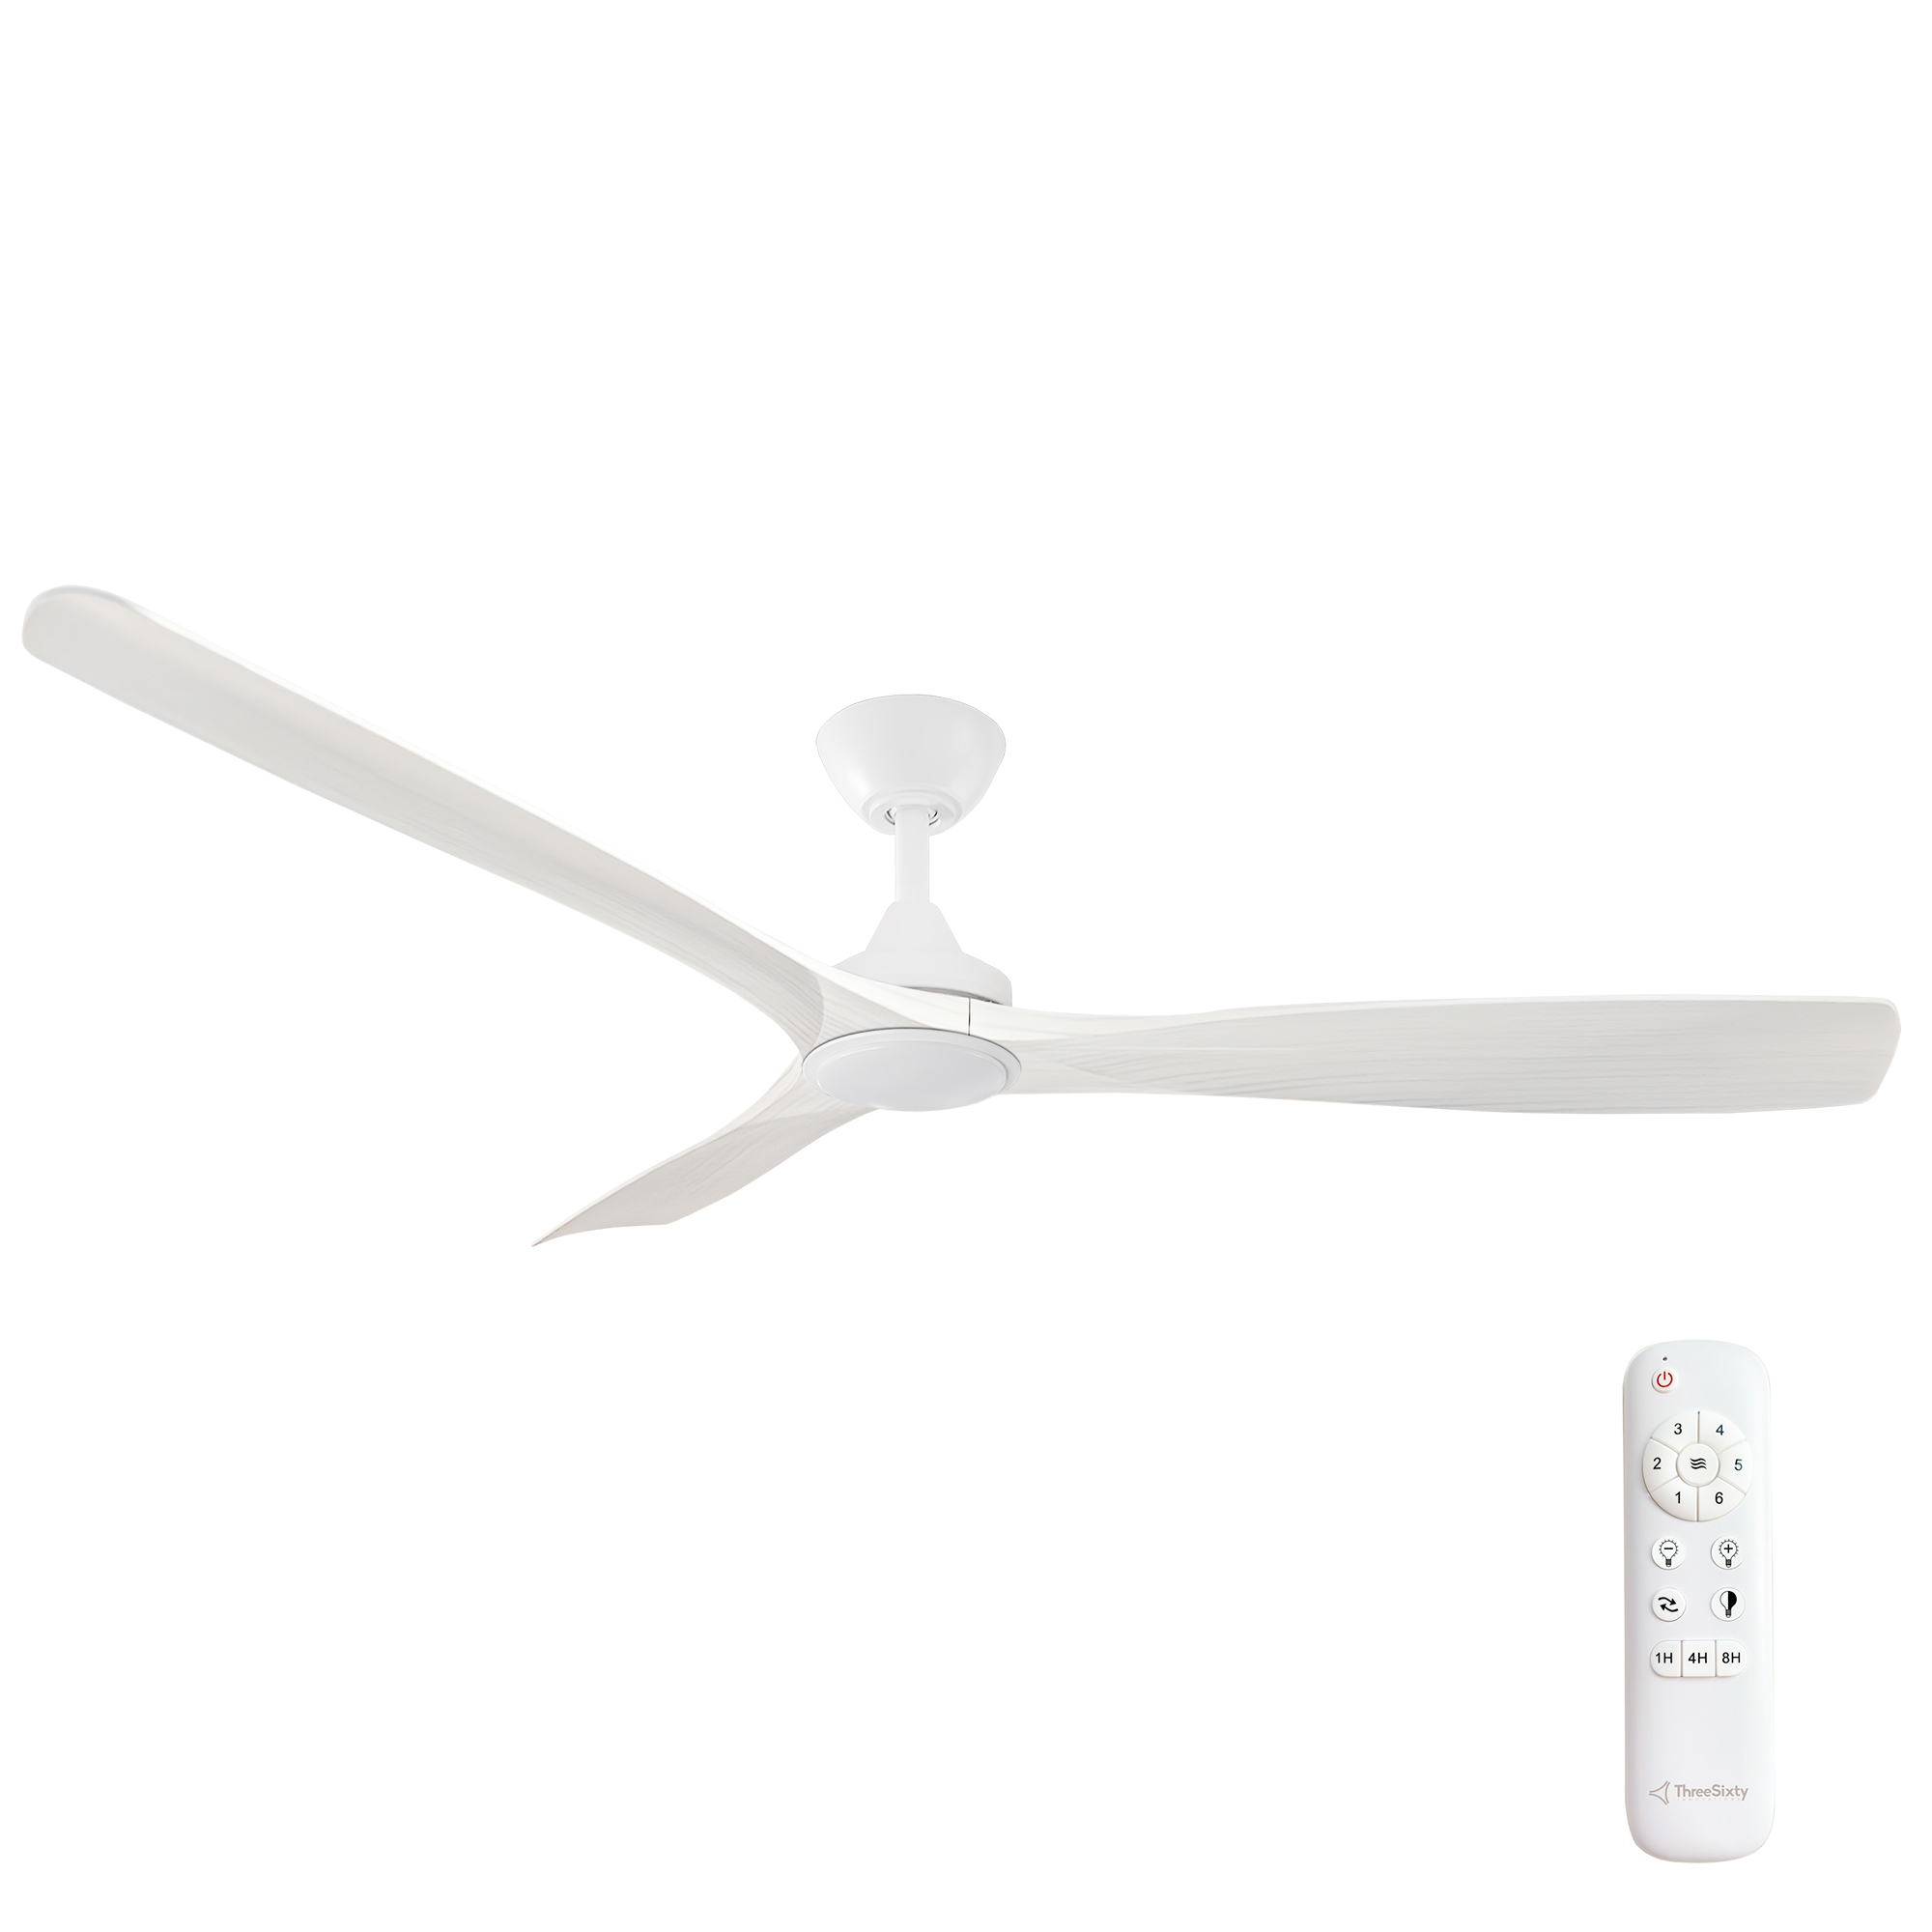 60" Spitfire DC Ceiling Fan in Matte White with White Wash blades and 18W CCT LED Light